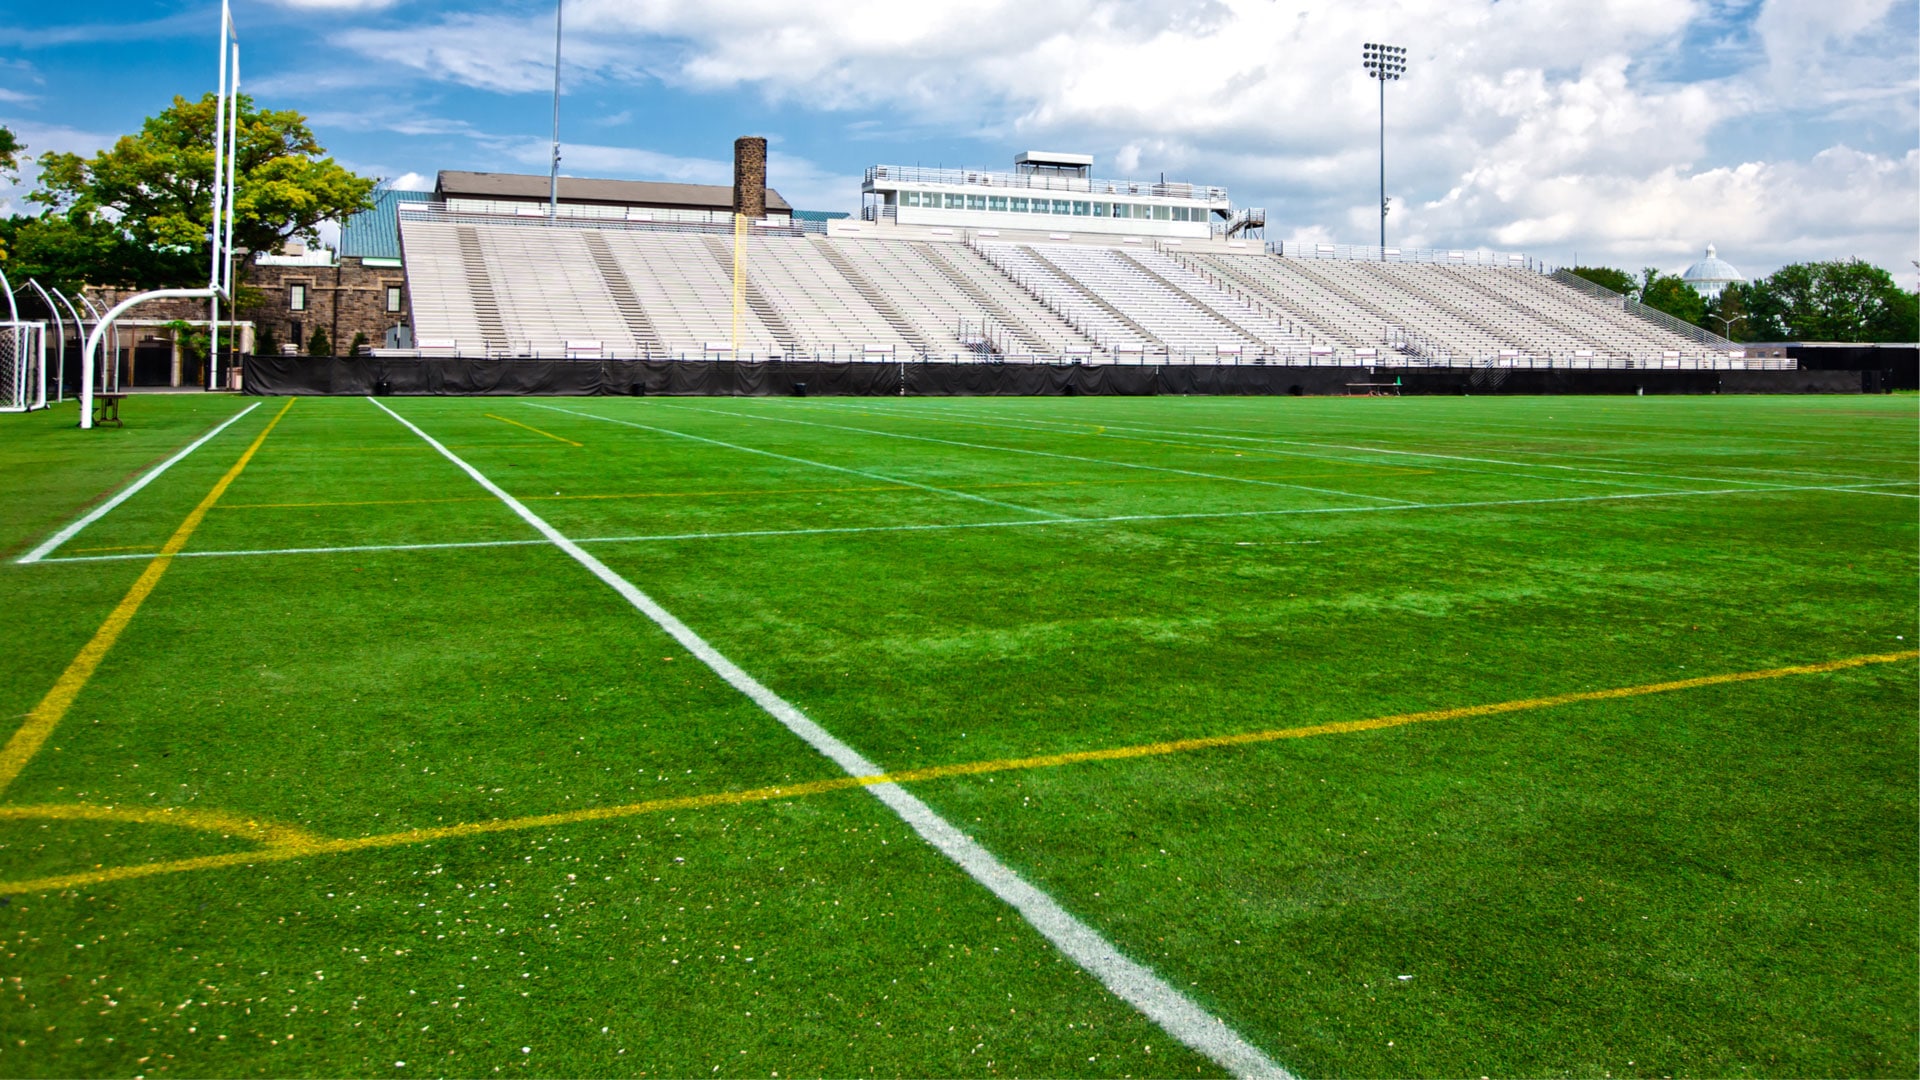 How Much Does a Turf Field Cost Compared to a Traditional Grass Pitch? |  Keystone Sports Construction